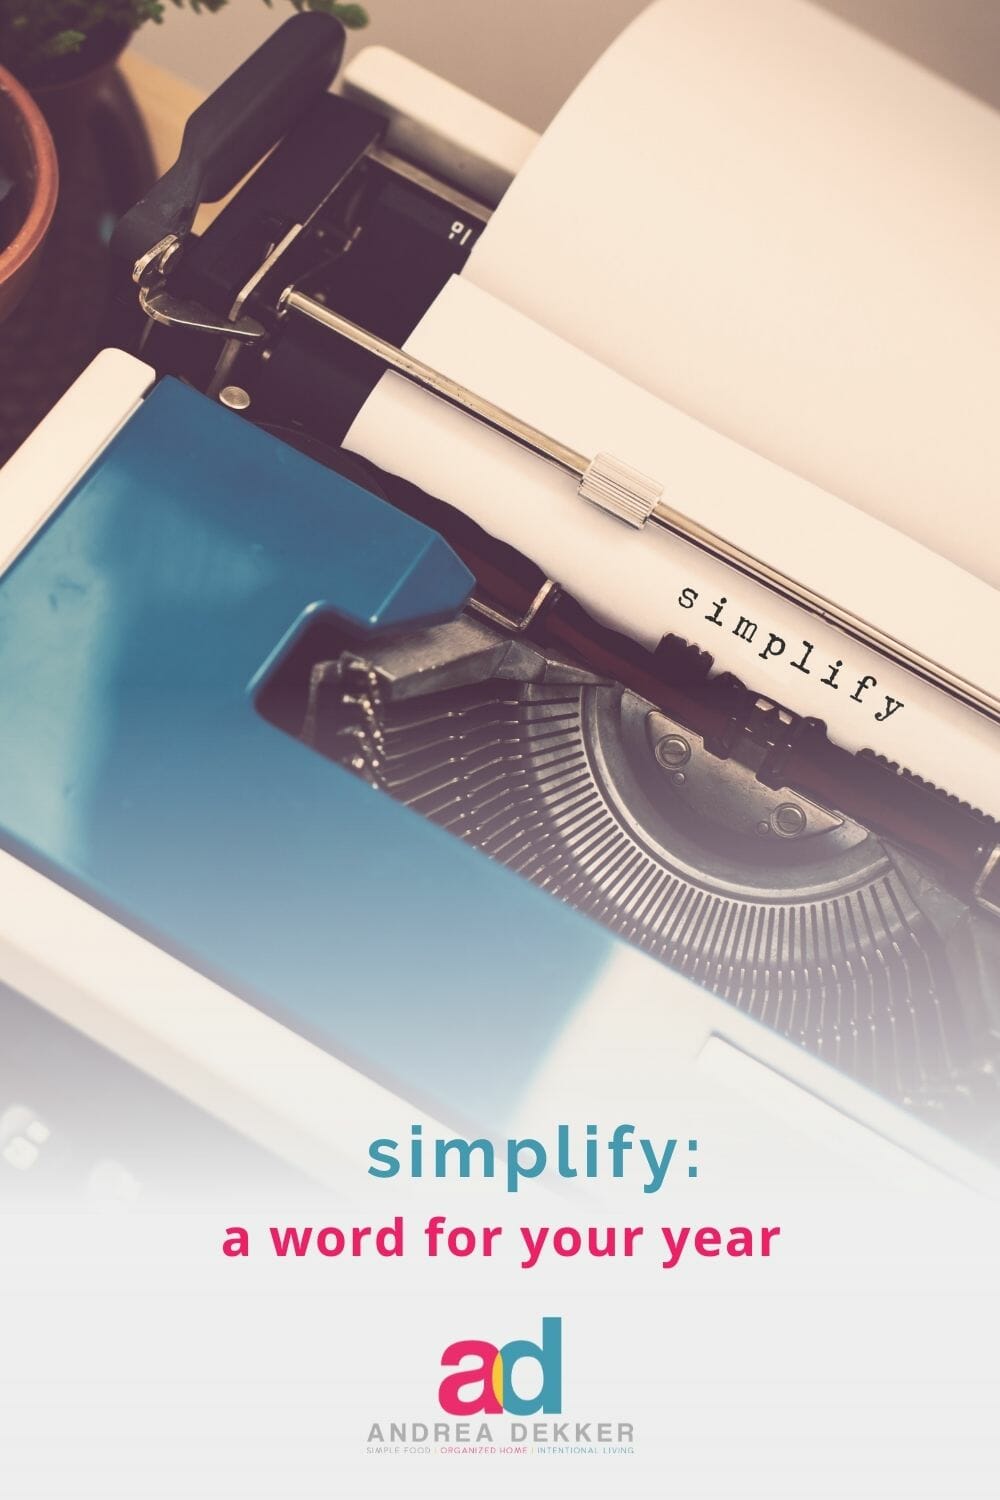 See how the word "simplify" has the power to revolutionize your home, your family, your schedule, and your life! via @andreadekker